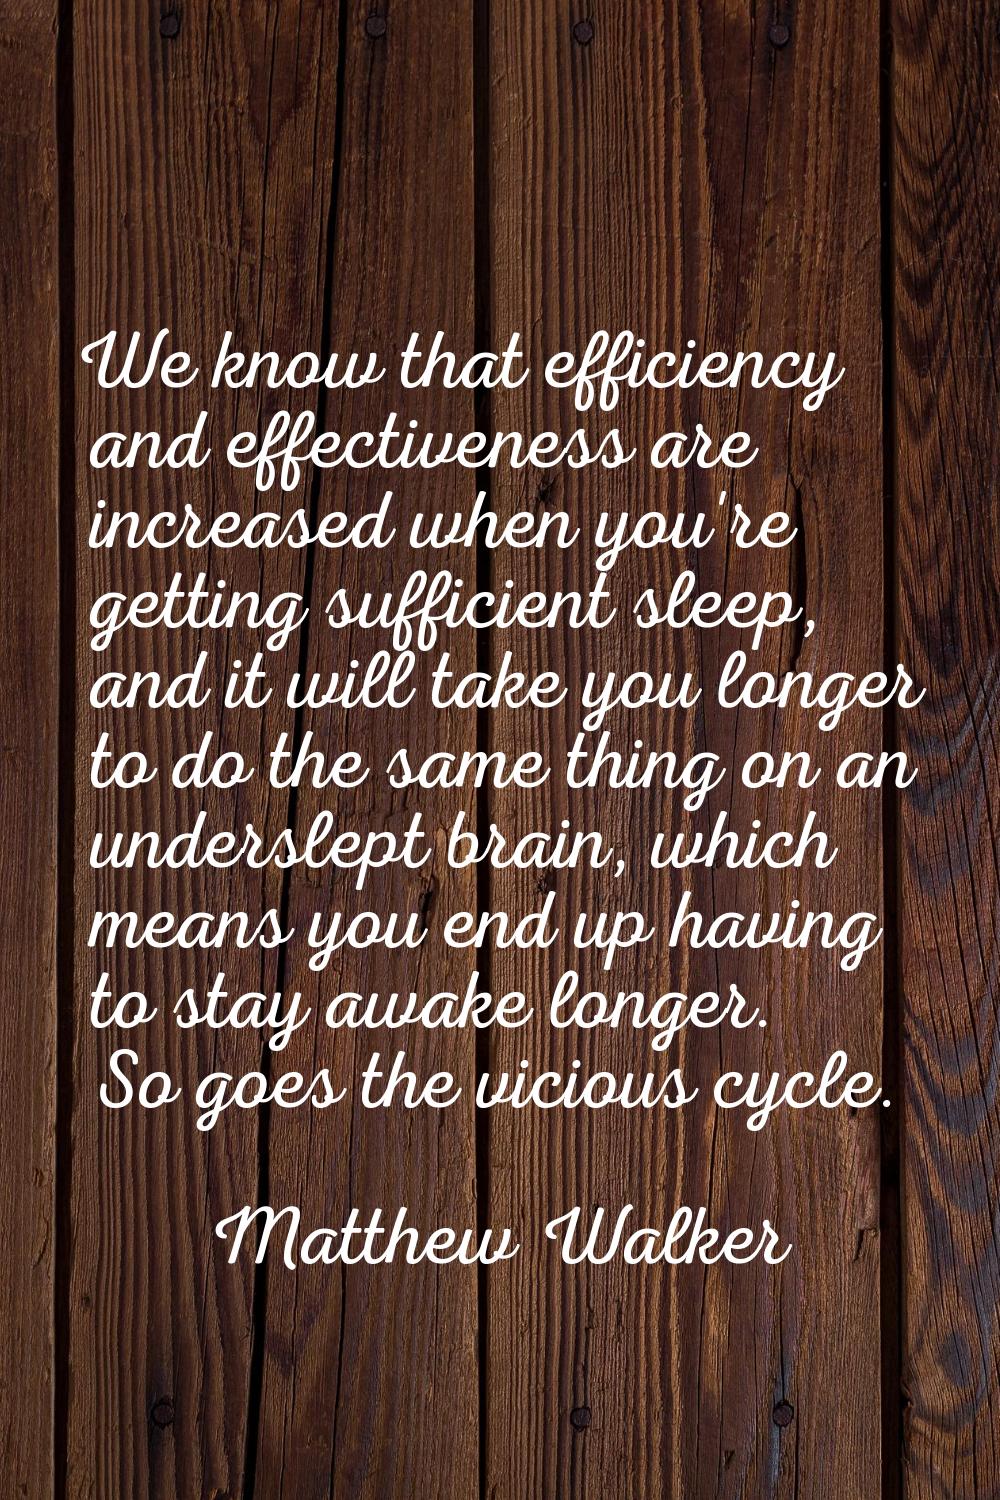 We know that efficiency and effectiveness are increased when you're getting sufficient sleep, and i